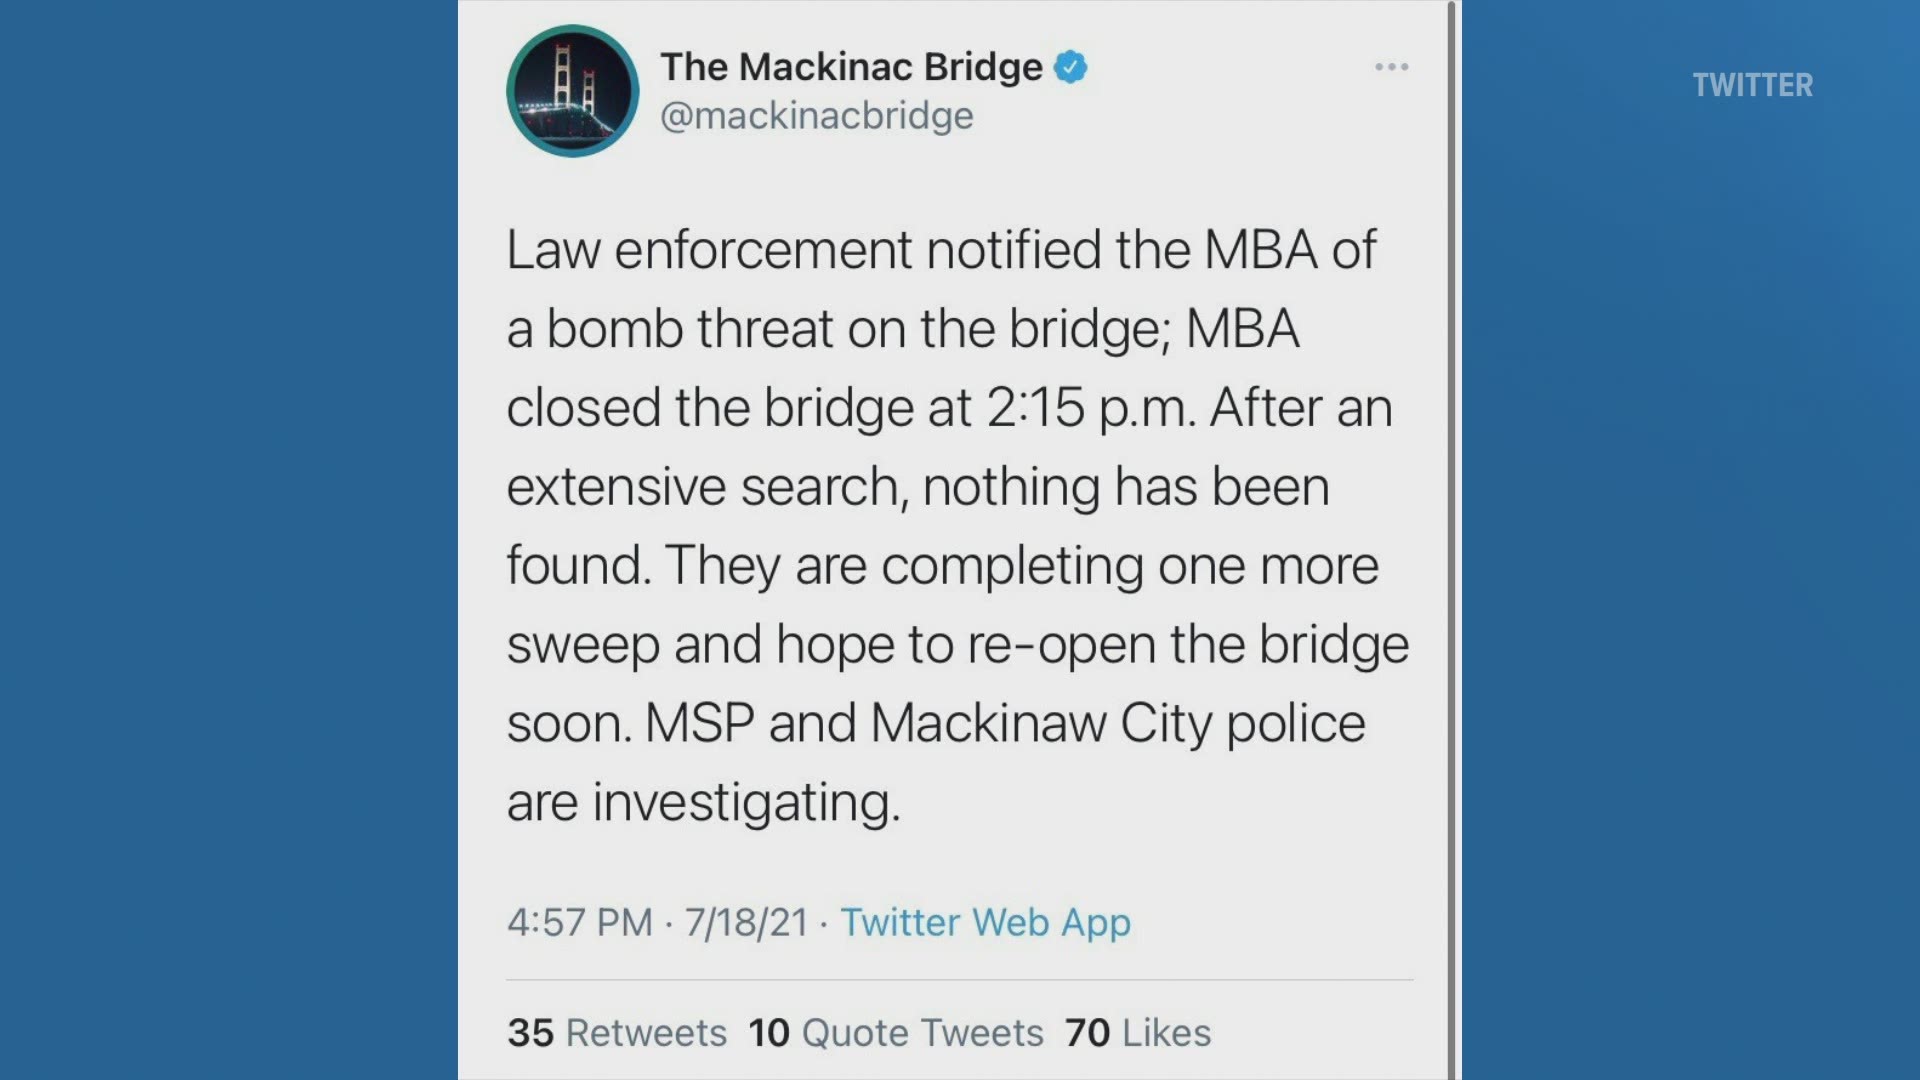 According to the Mackinac Bridge Twitter page, police found nothing in the area after an extensive search.